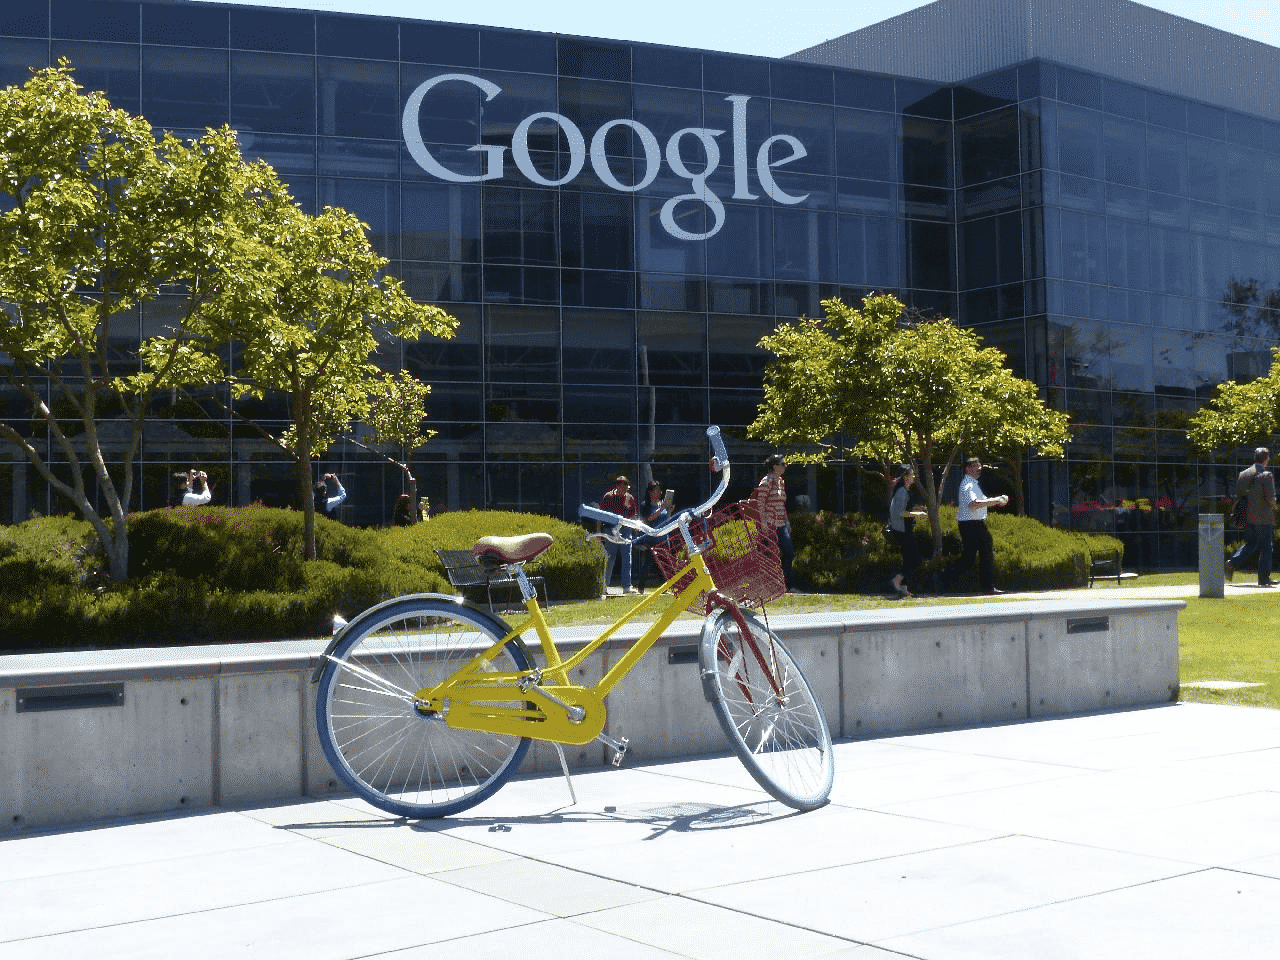 Google headquarters with a yellow bike in front